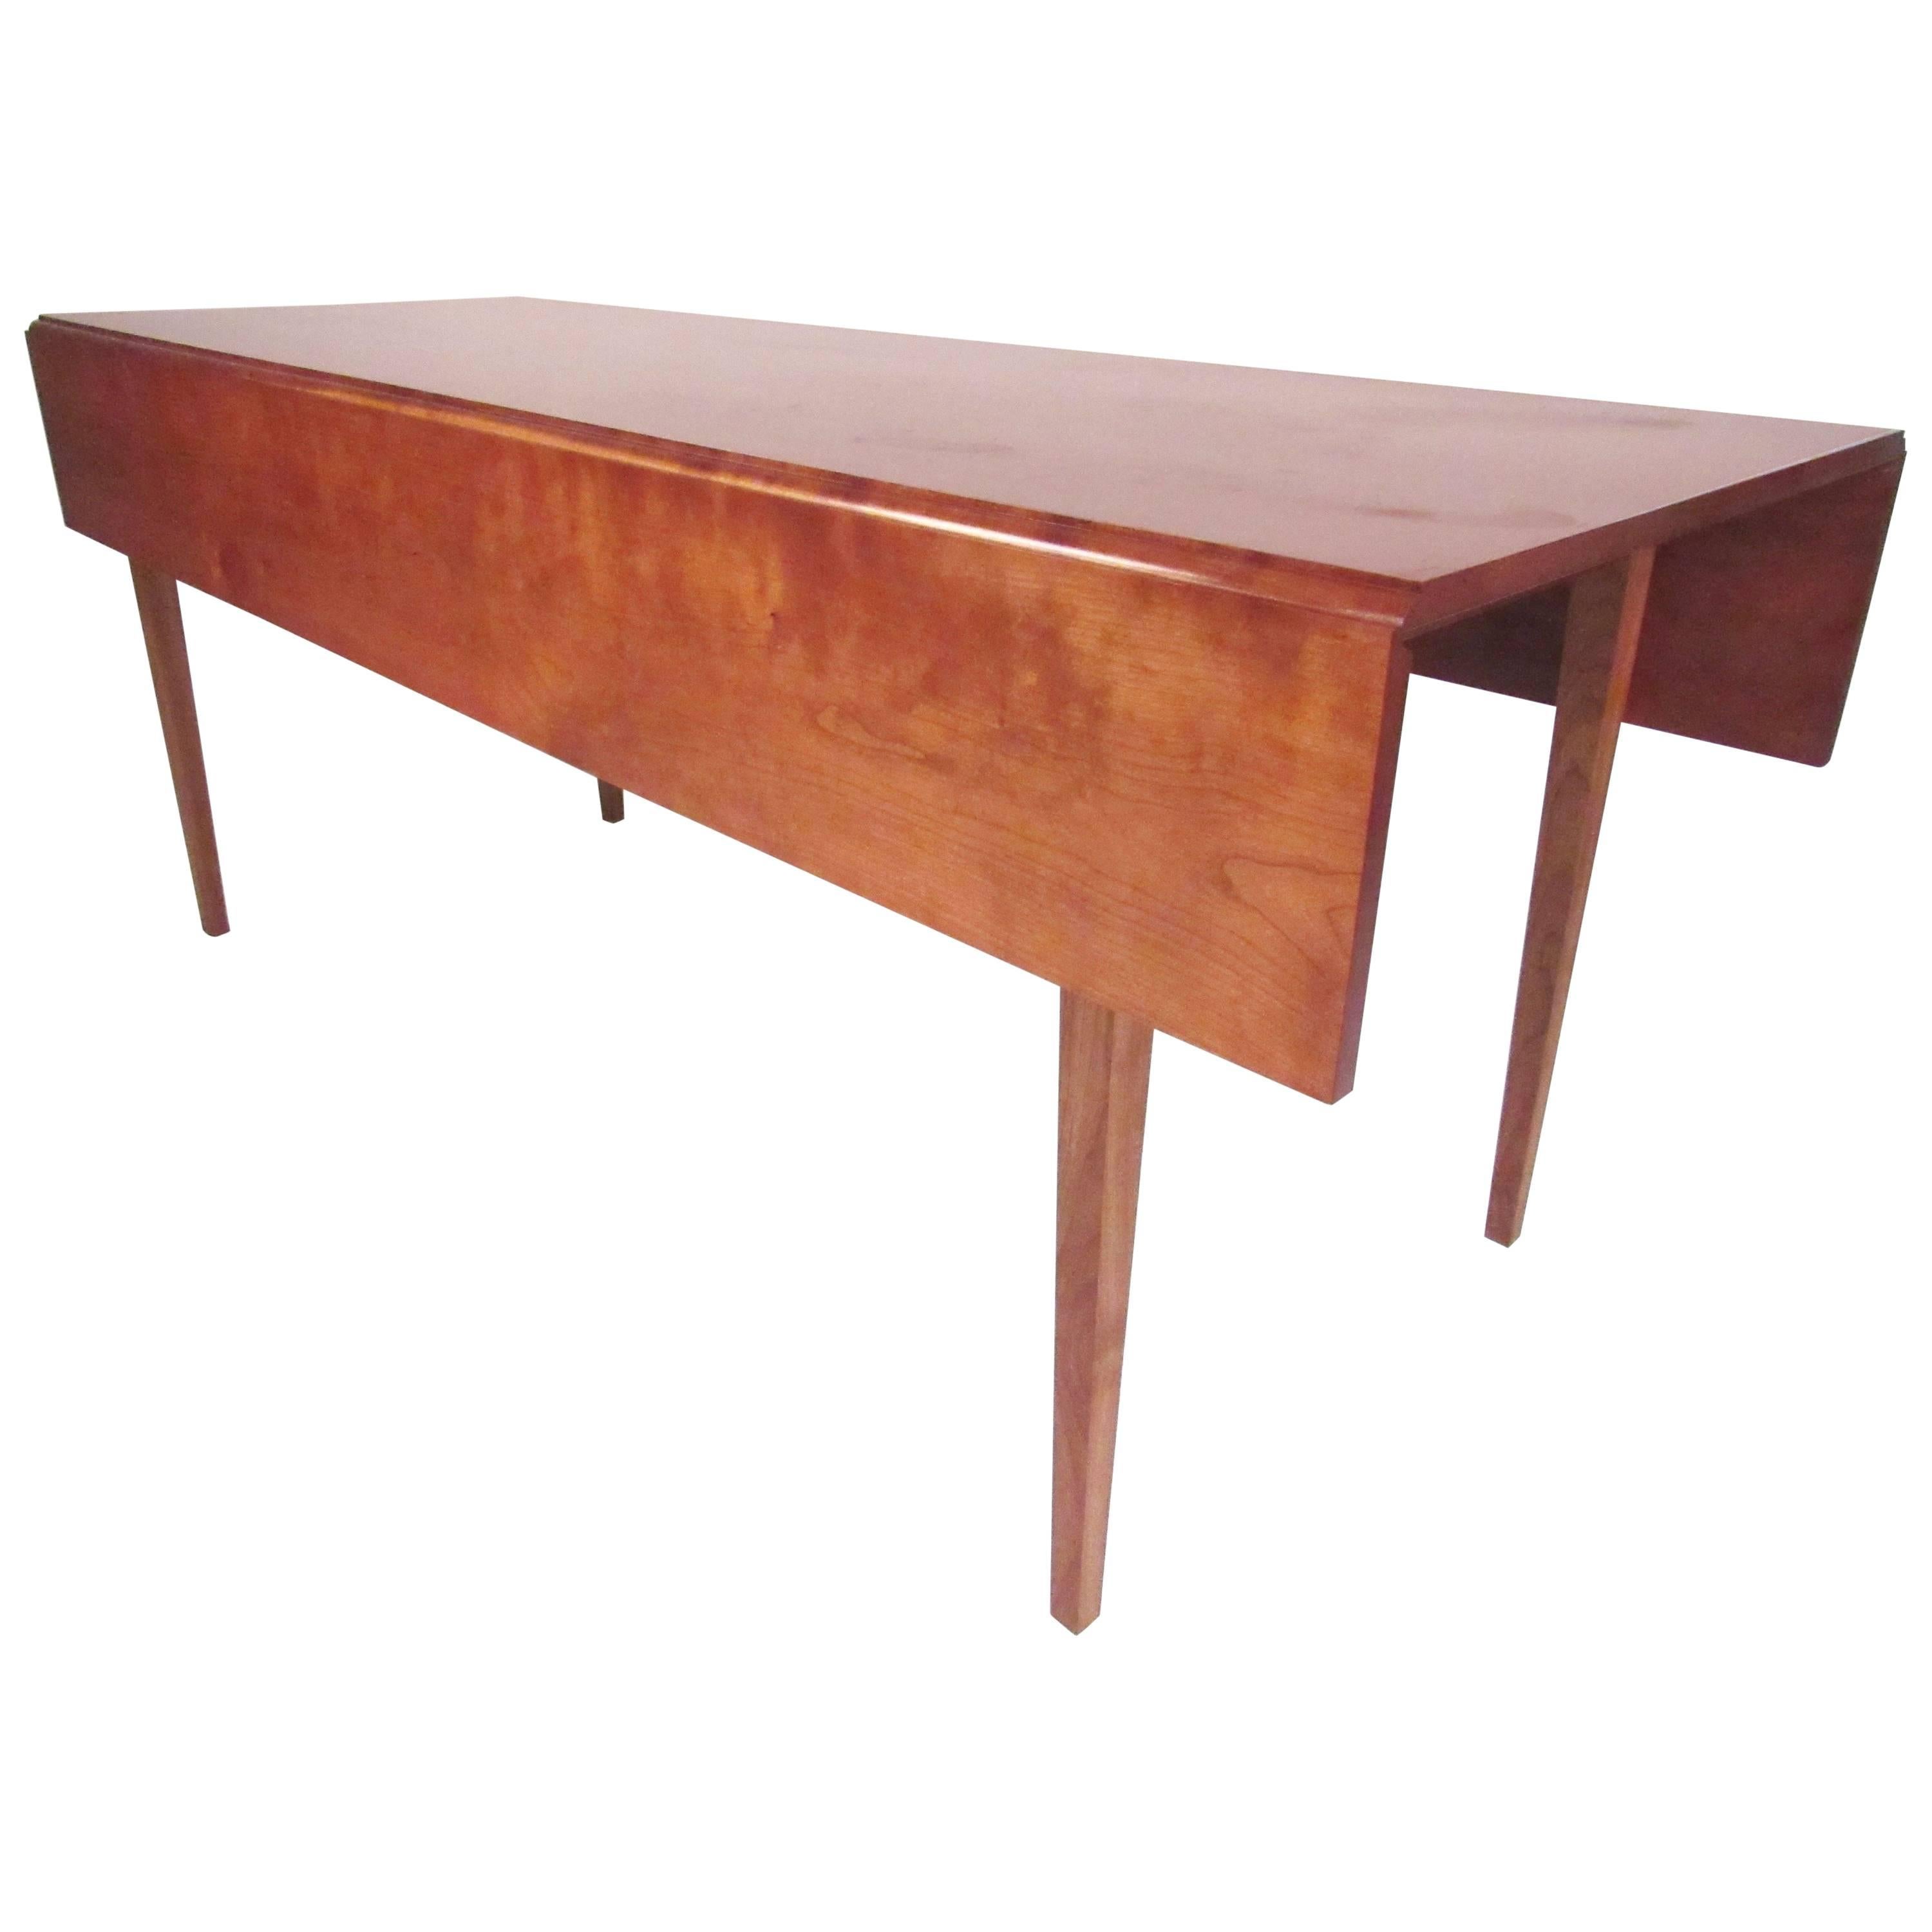 Large Drop Leaf Table in Cherry